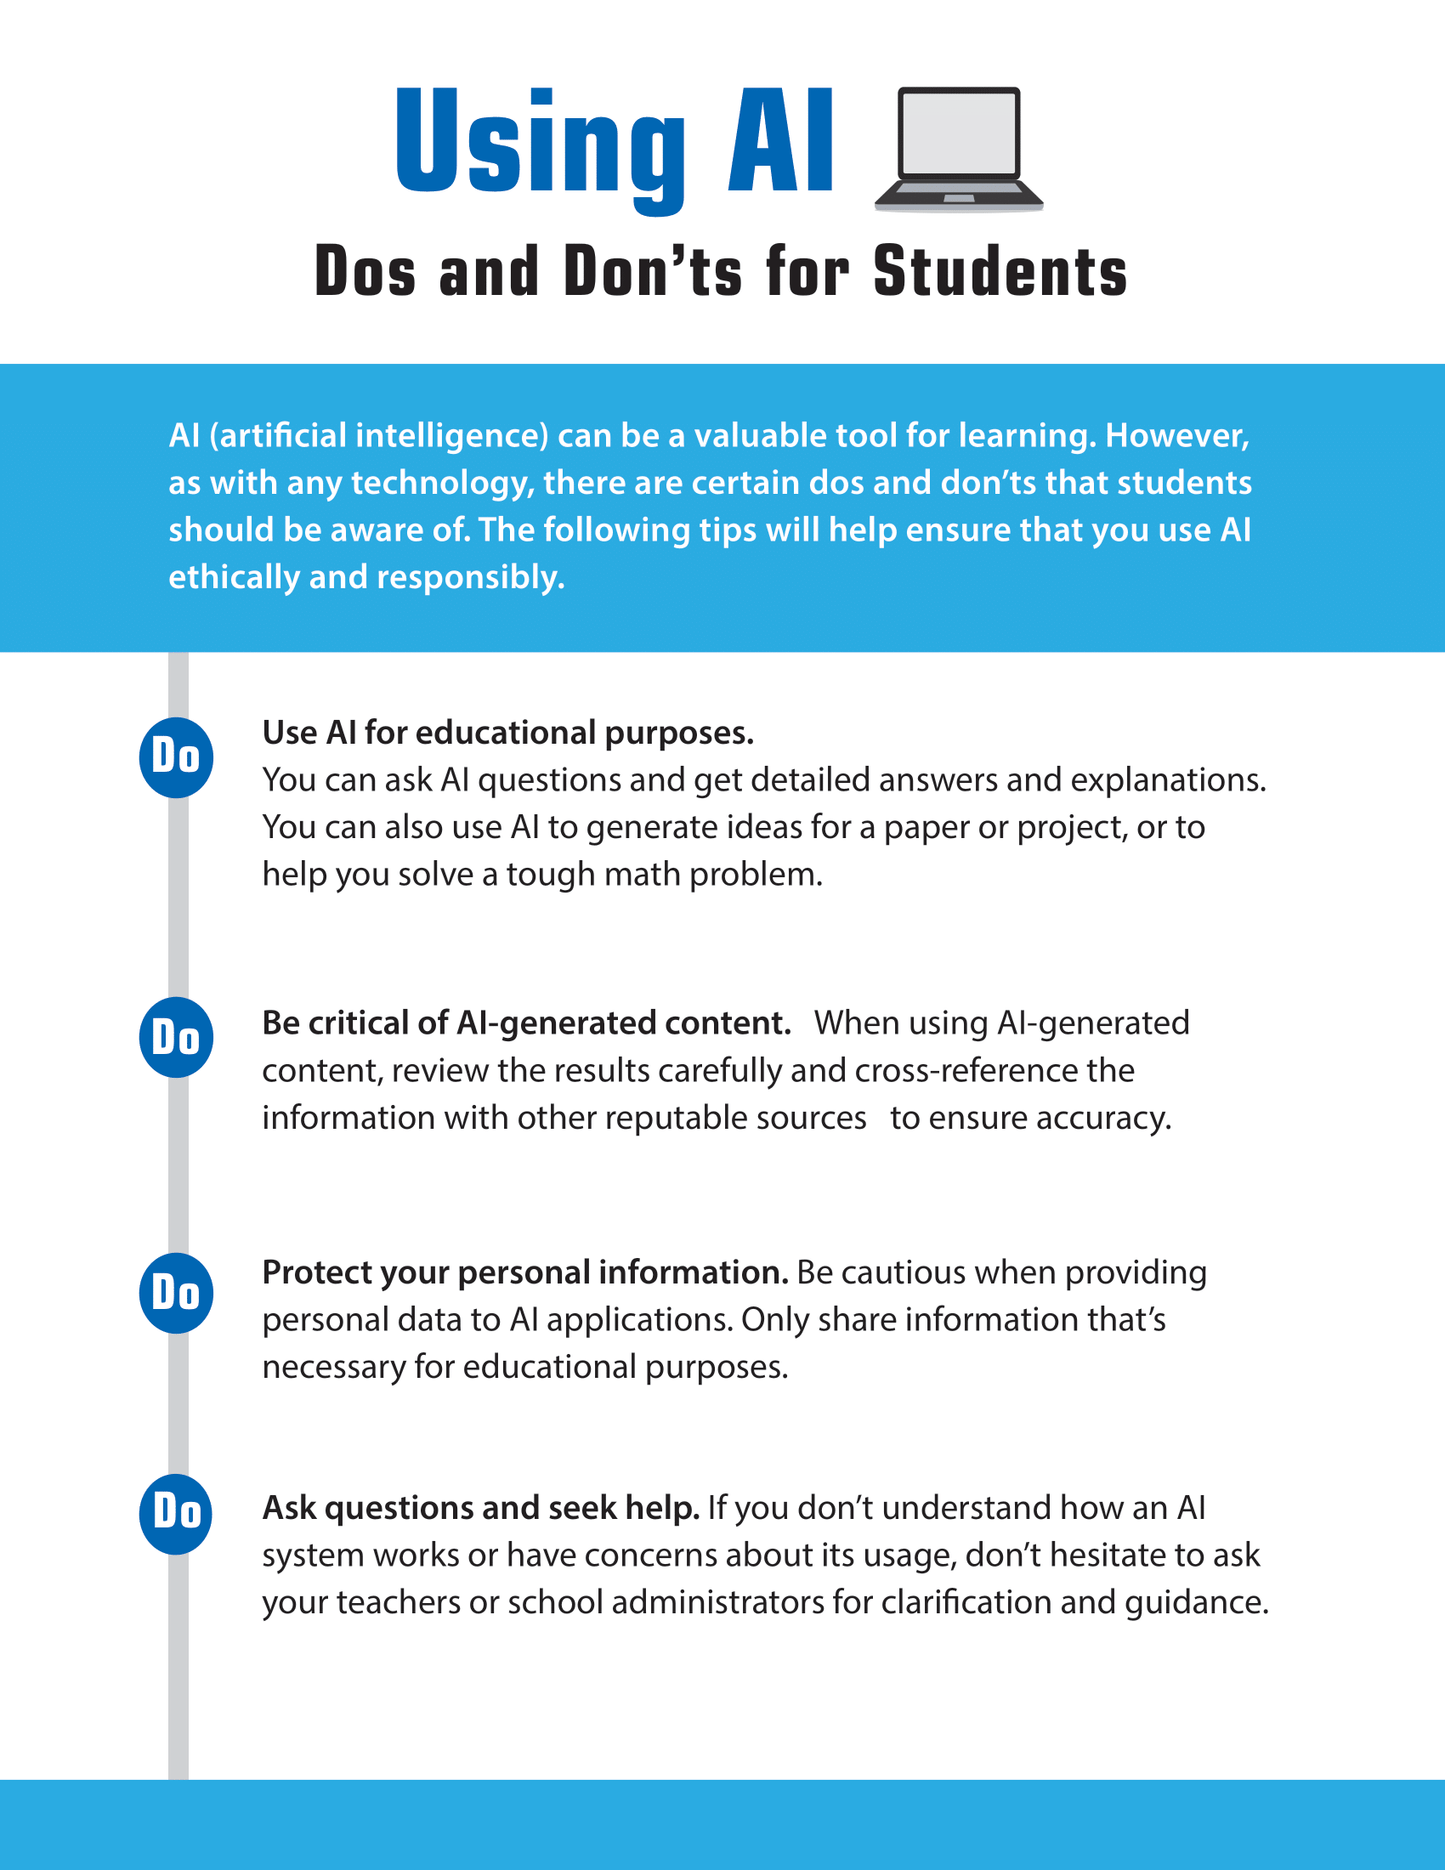 Using AI - Dos and Don'ts for Students